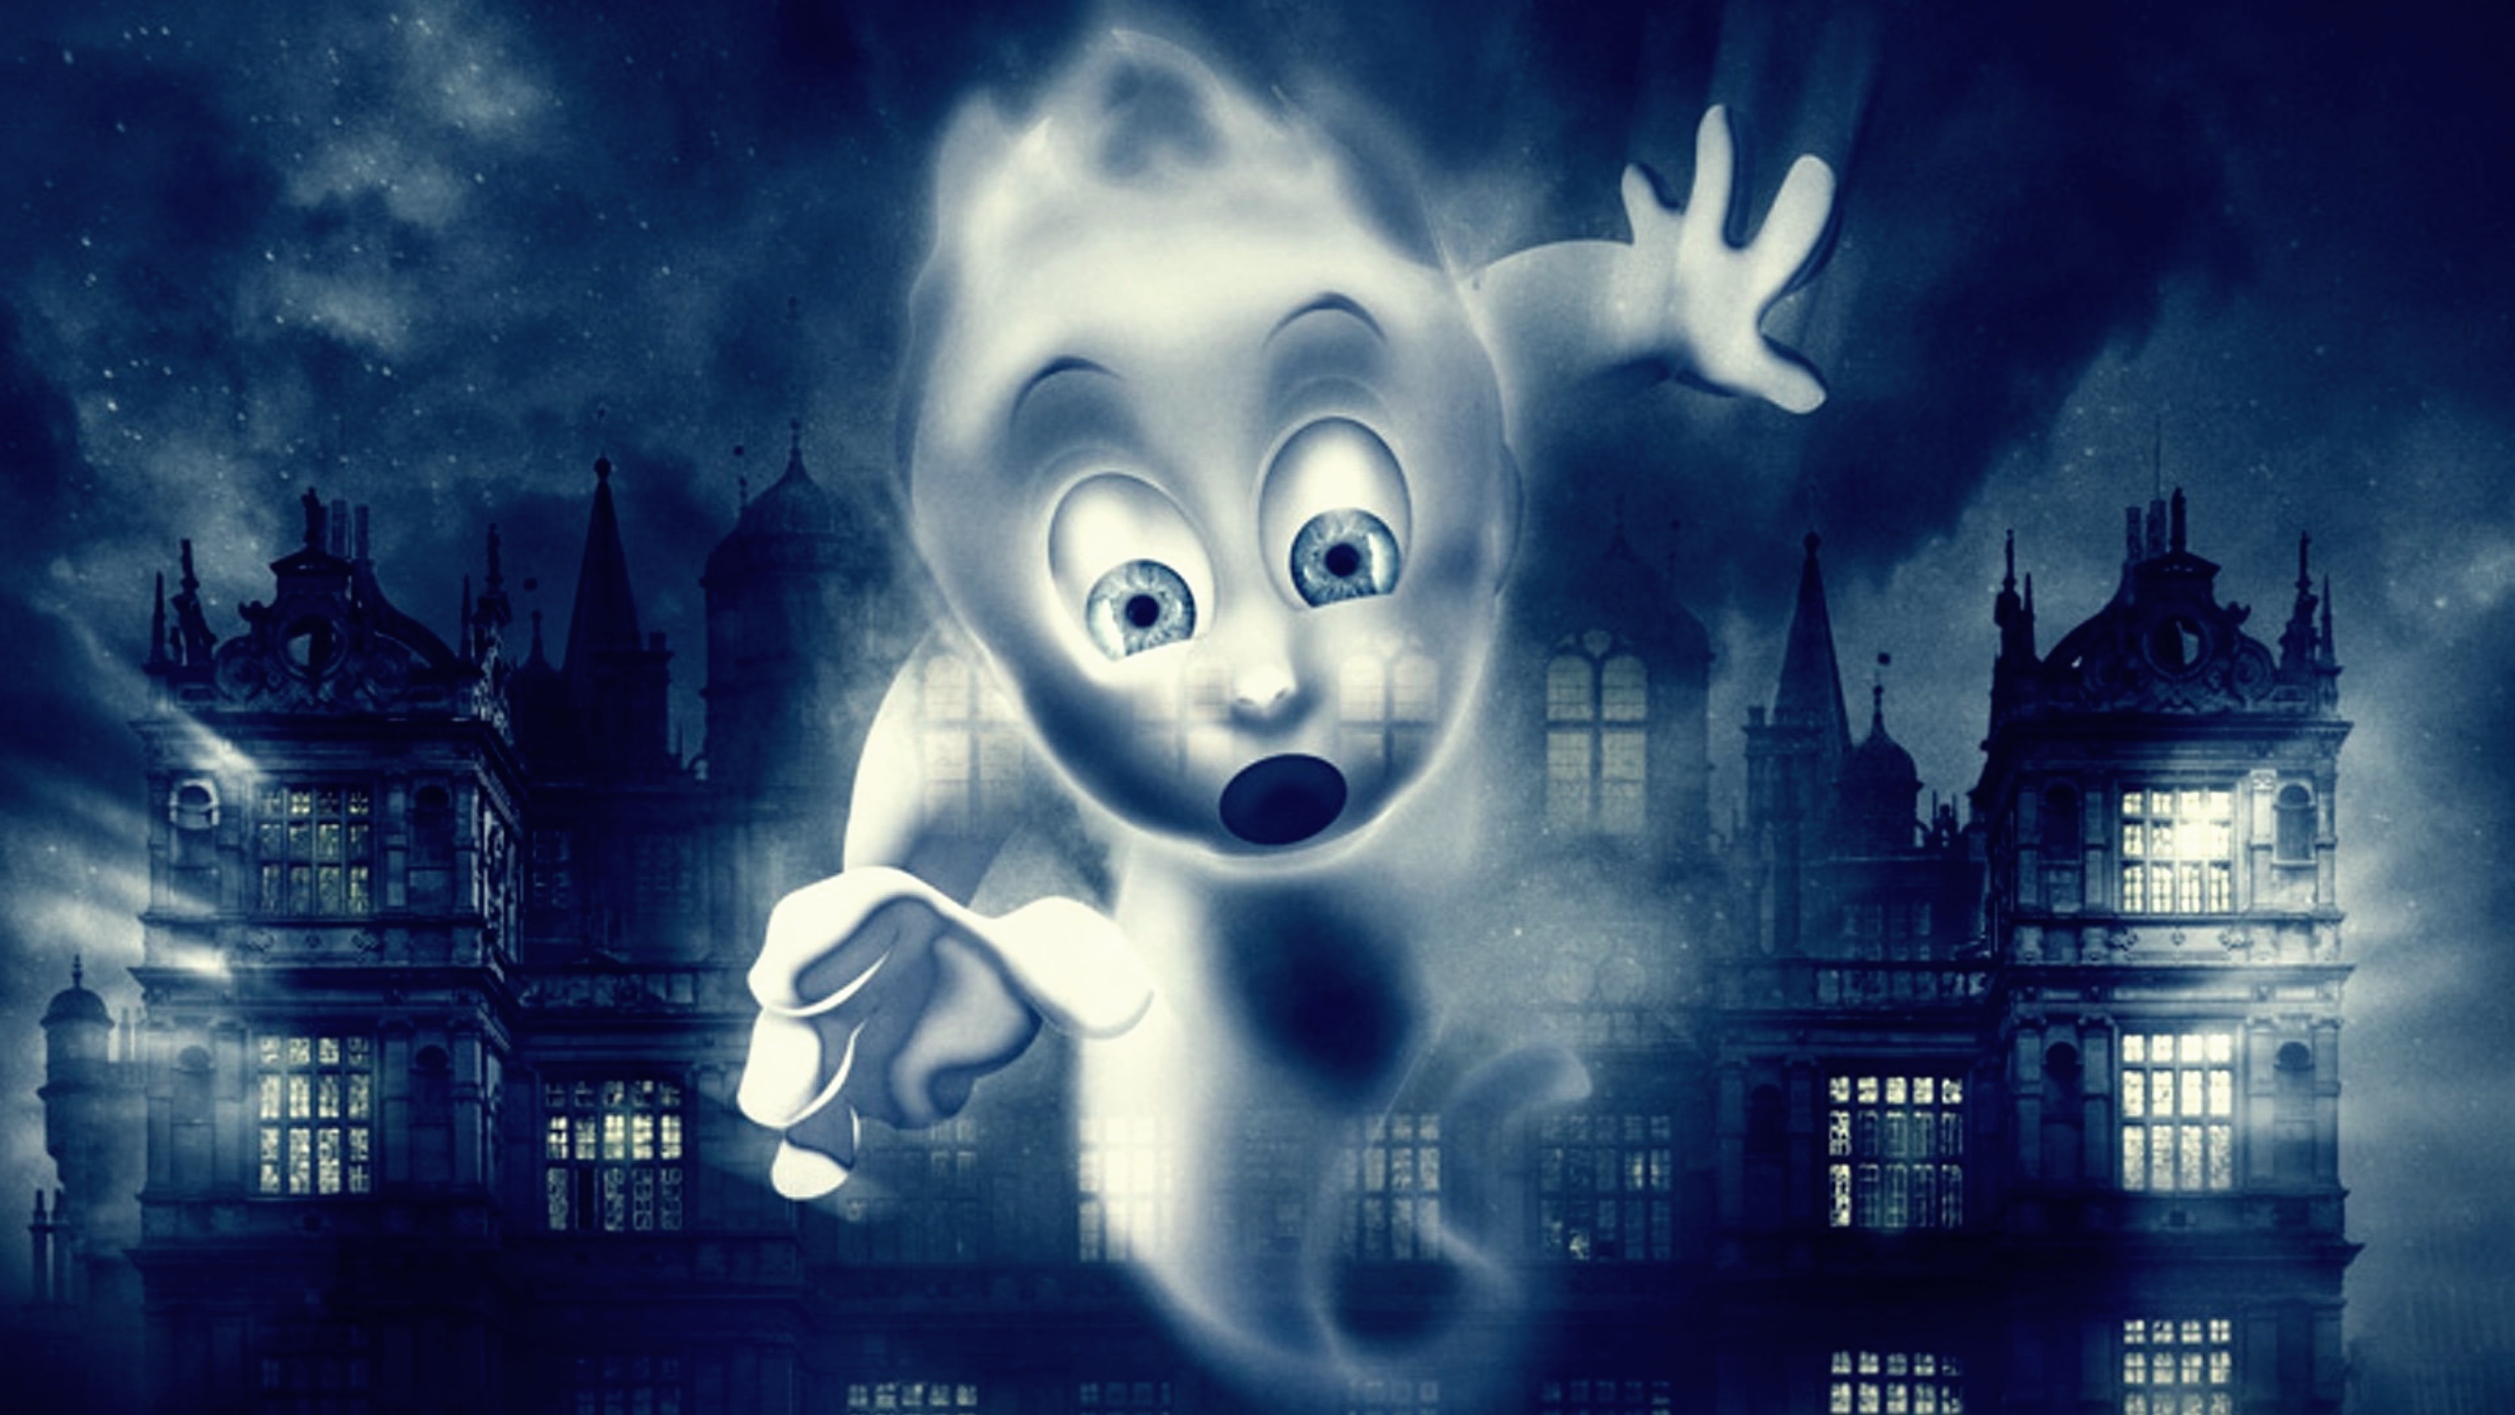 Ghoster Full HD Movie Download